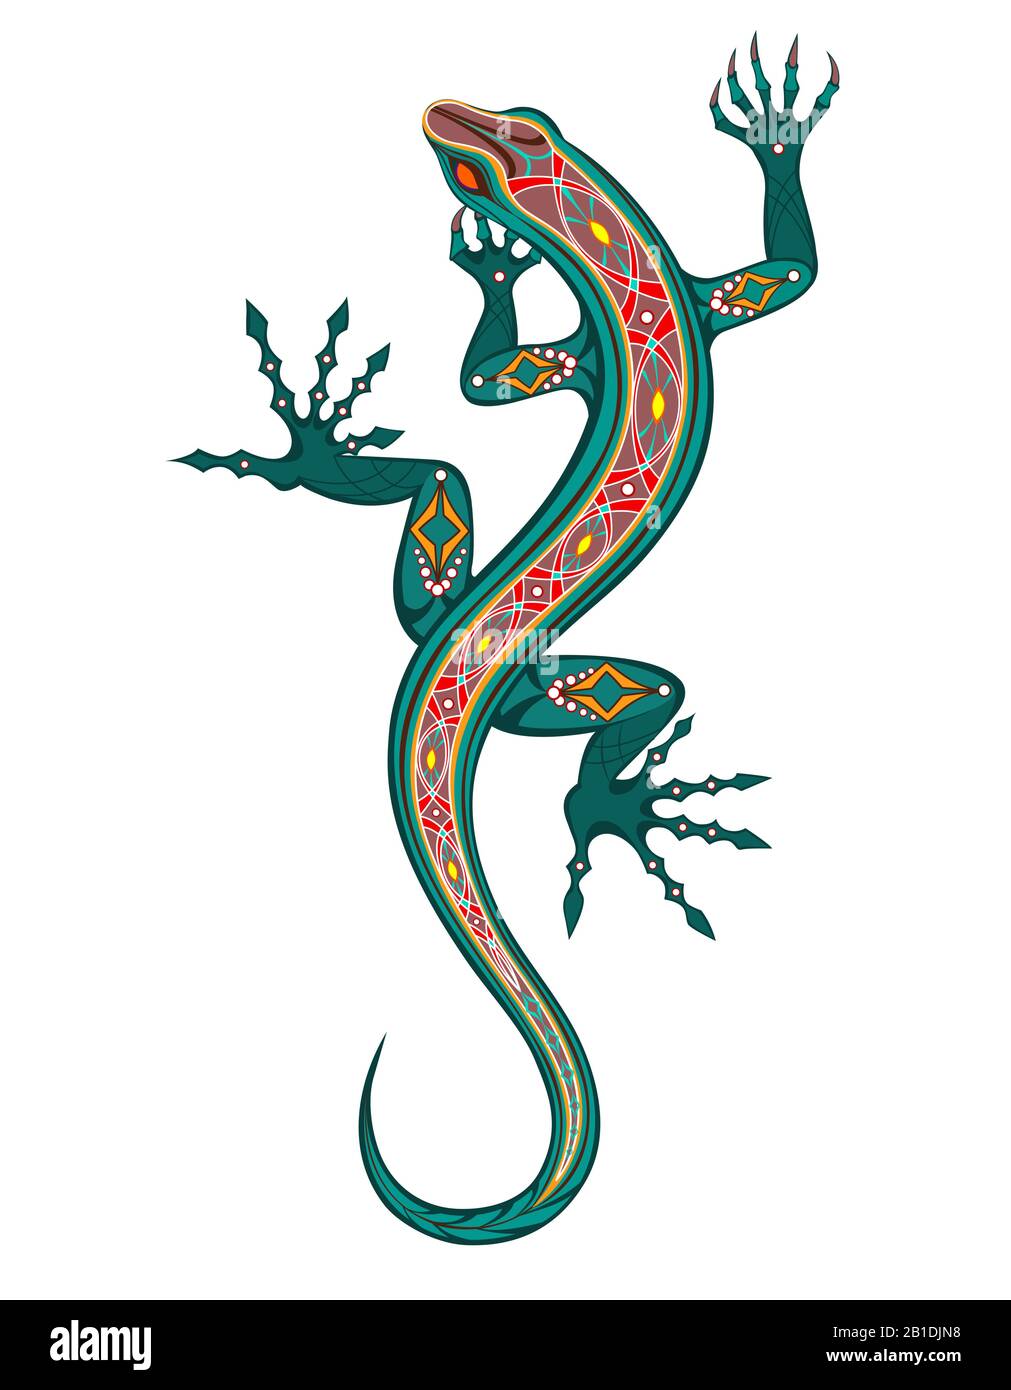 Patterned, artistic, exotic, bright lizard, painted in green and red on white background. Tattoo style. Stock Vector